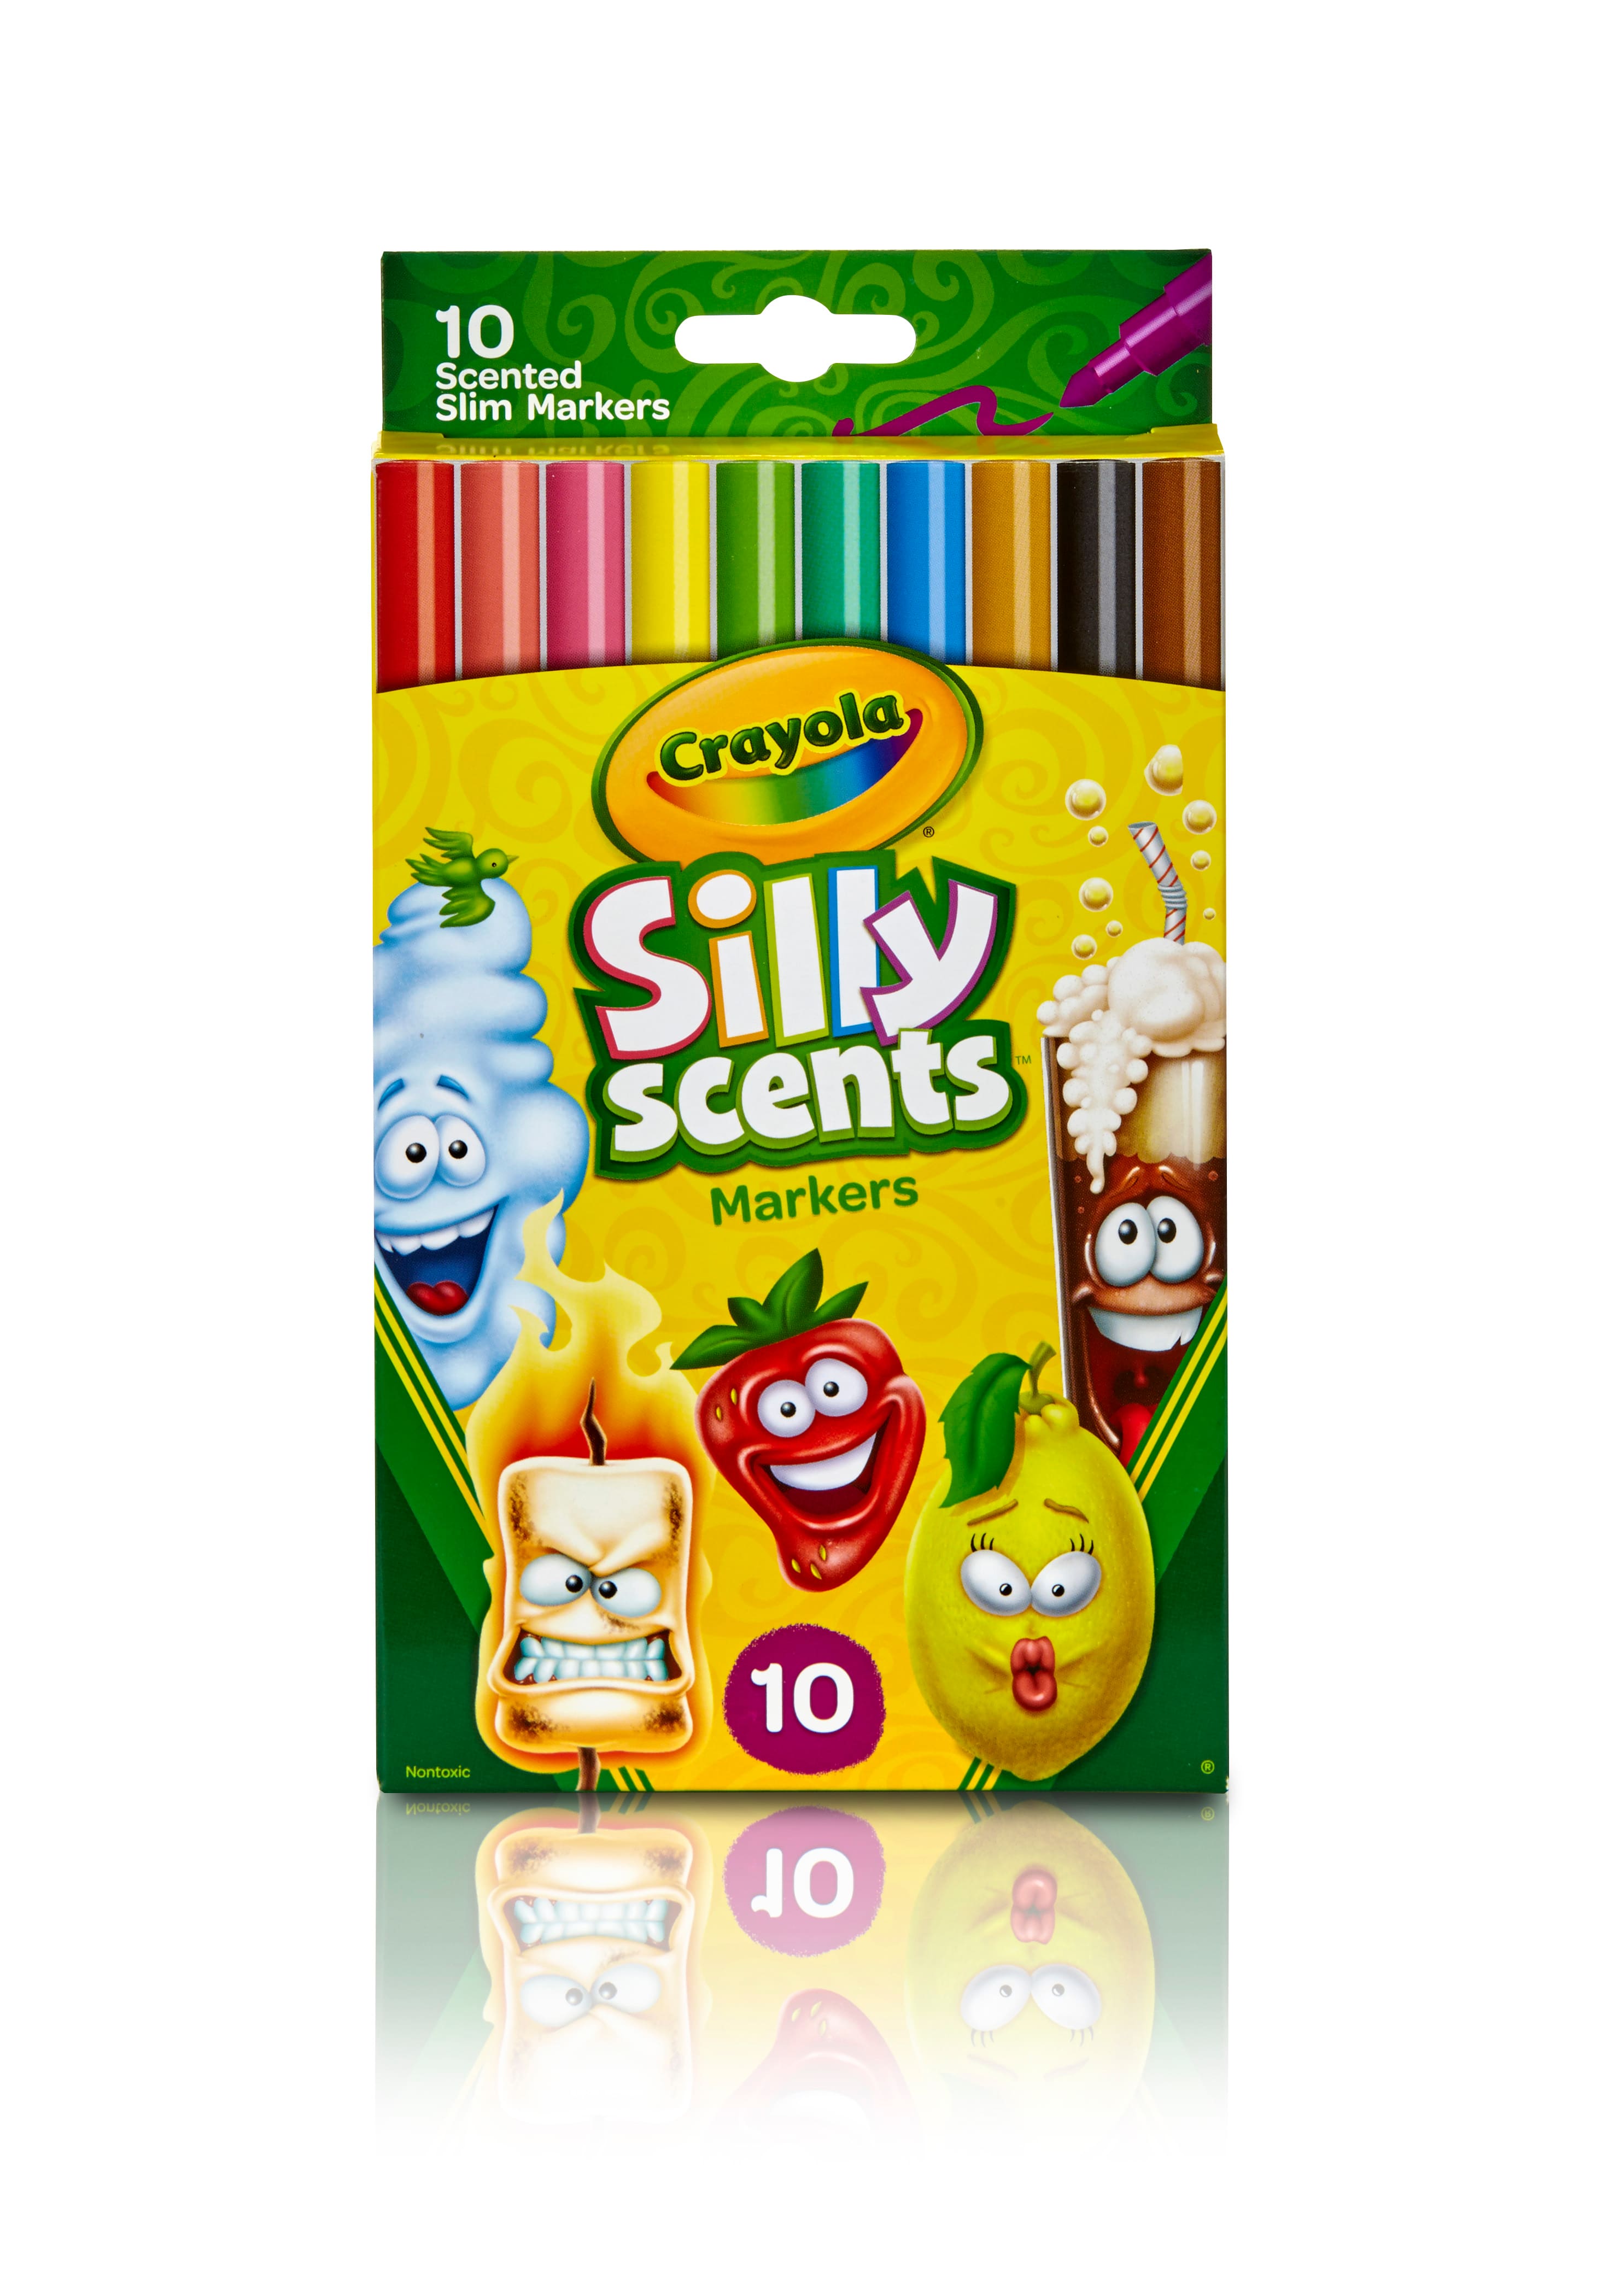 Silly Scents Marker Maker Review & Instructions